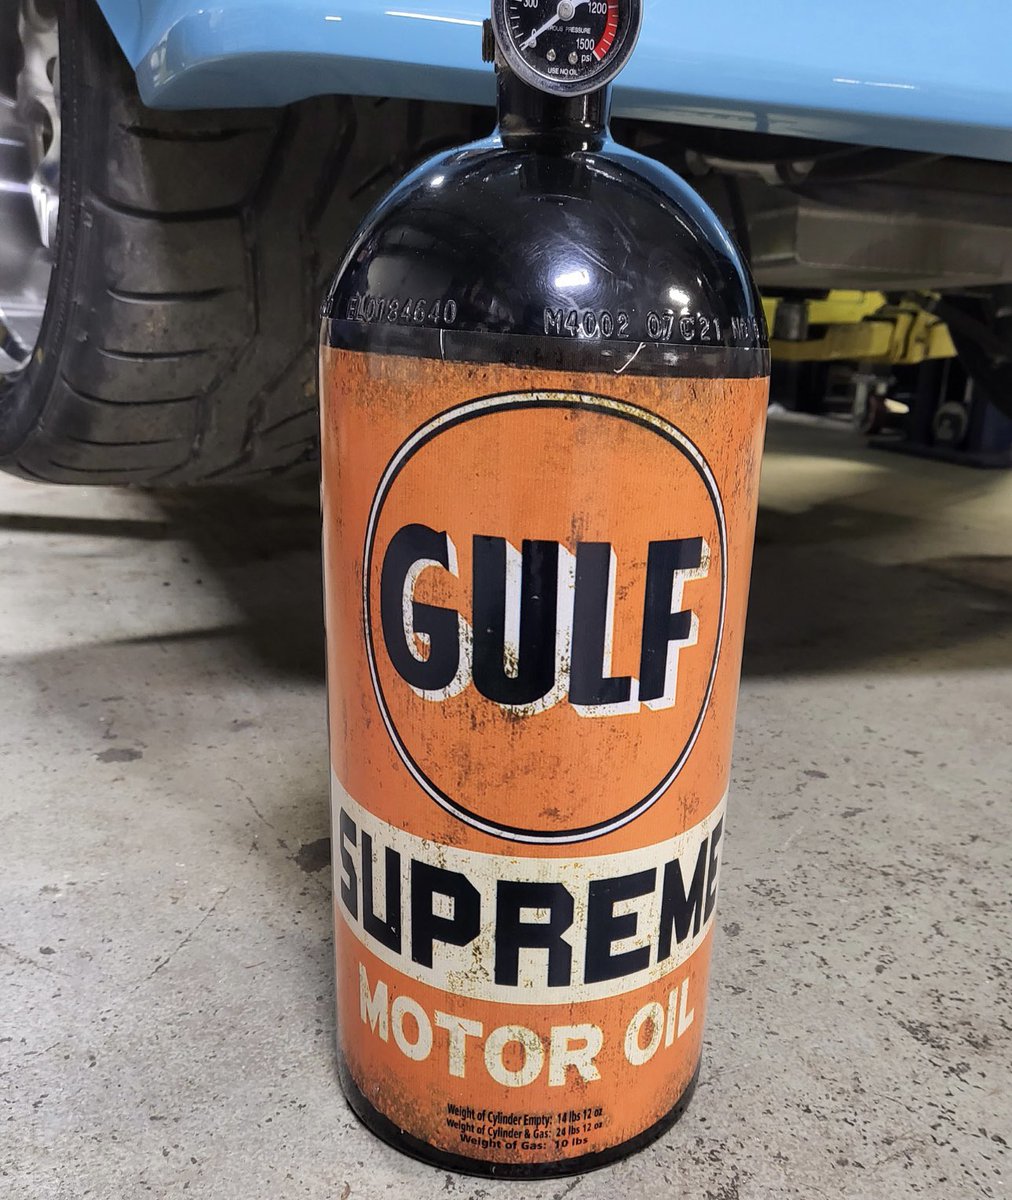 Nitrous bottle Gulf Oil can wrap we did for @66senditstang .
.
.
.
#1stplaceembroidery #wrap #nitrous #gulf #oilcan #hotrodpowertour #optimachallenge #racecar #power